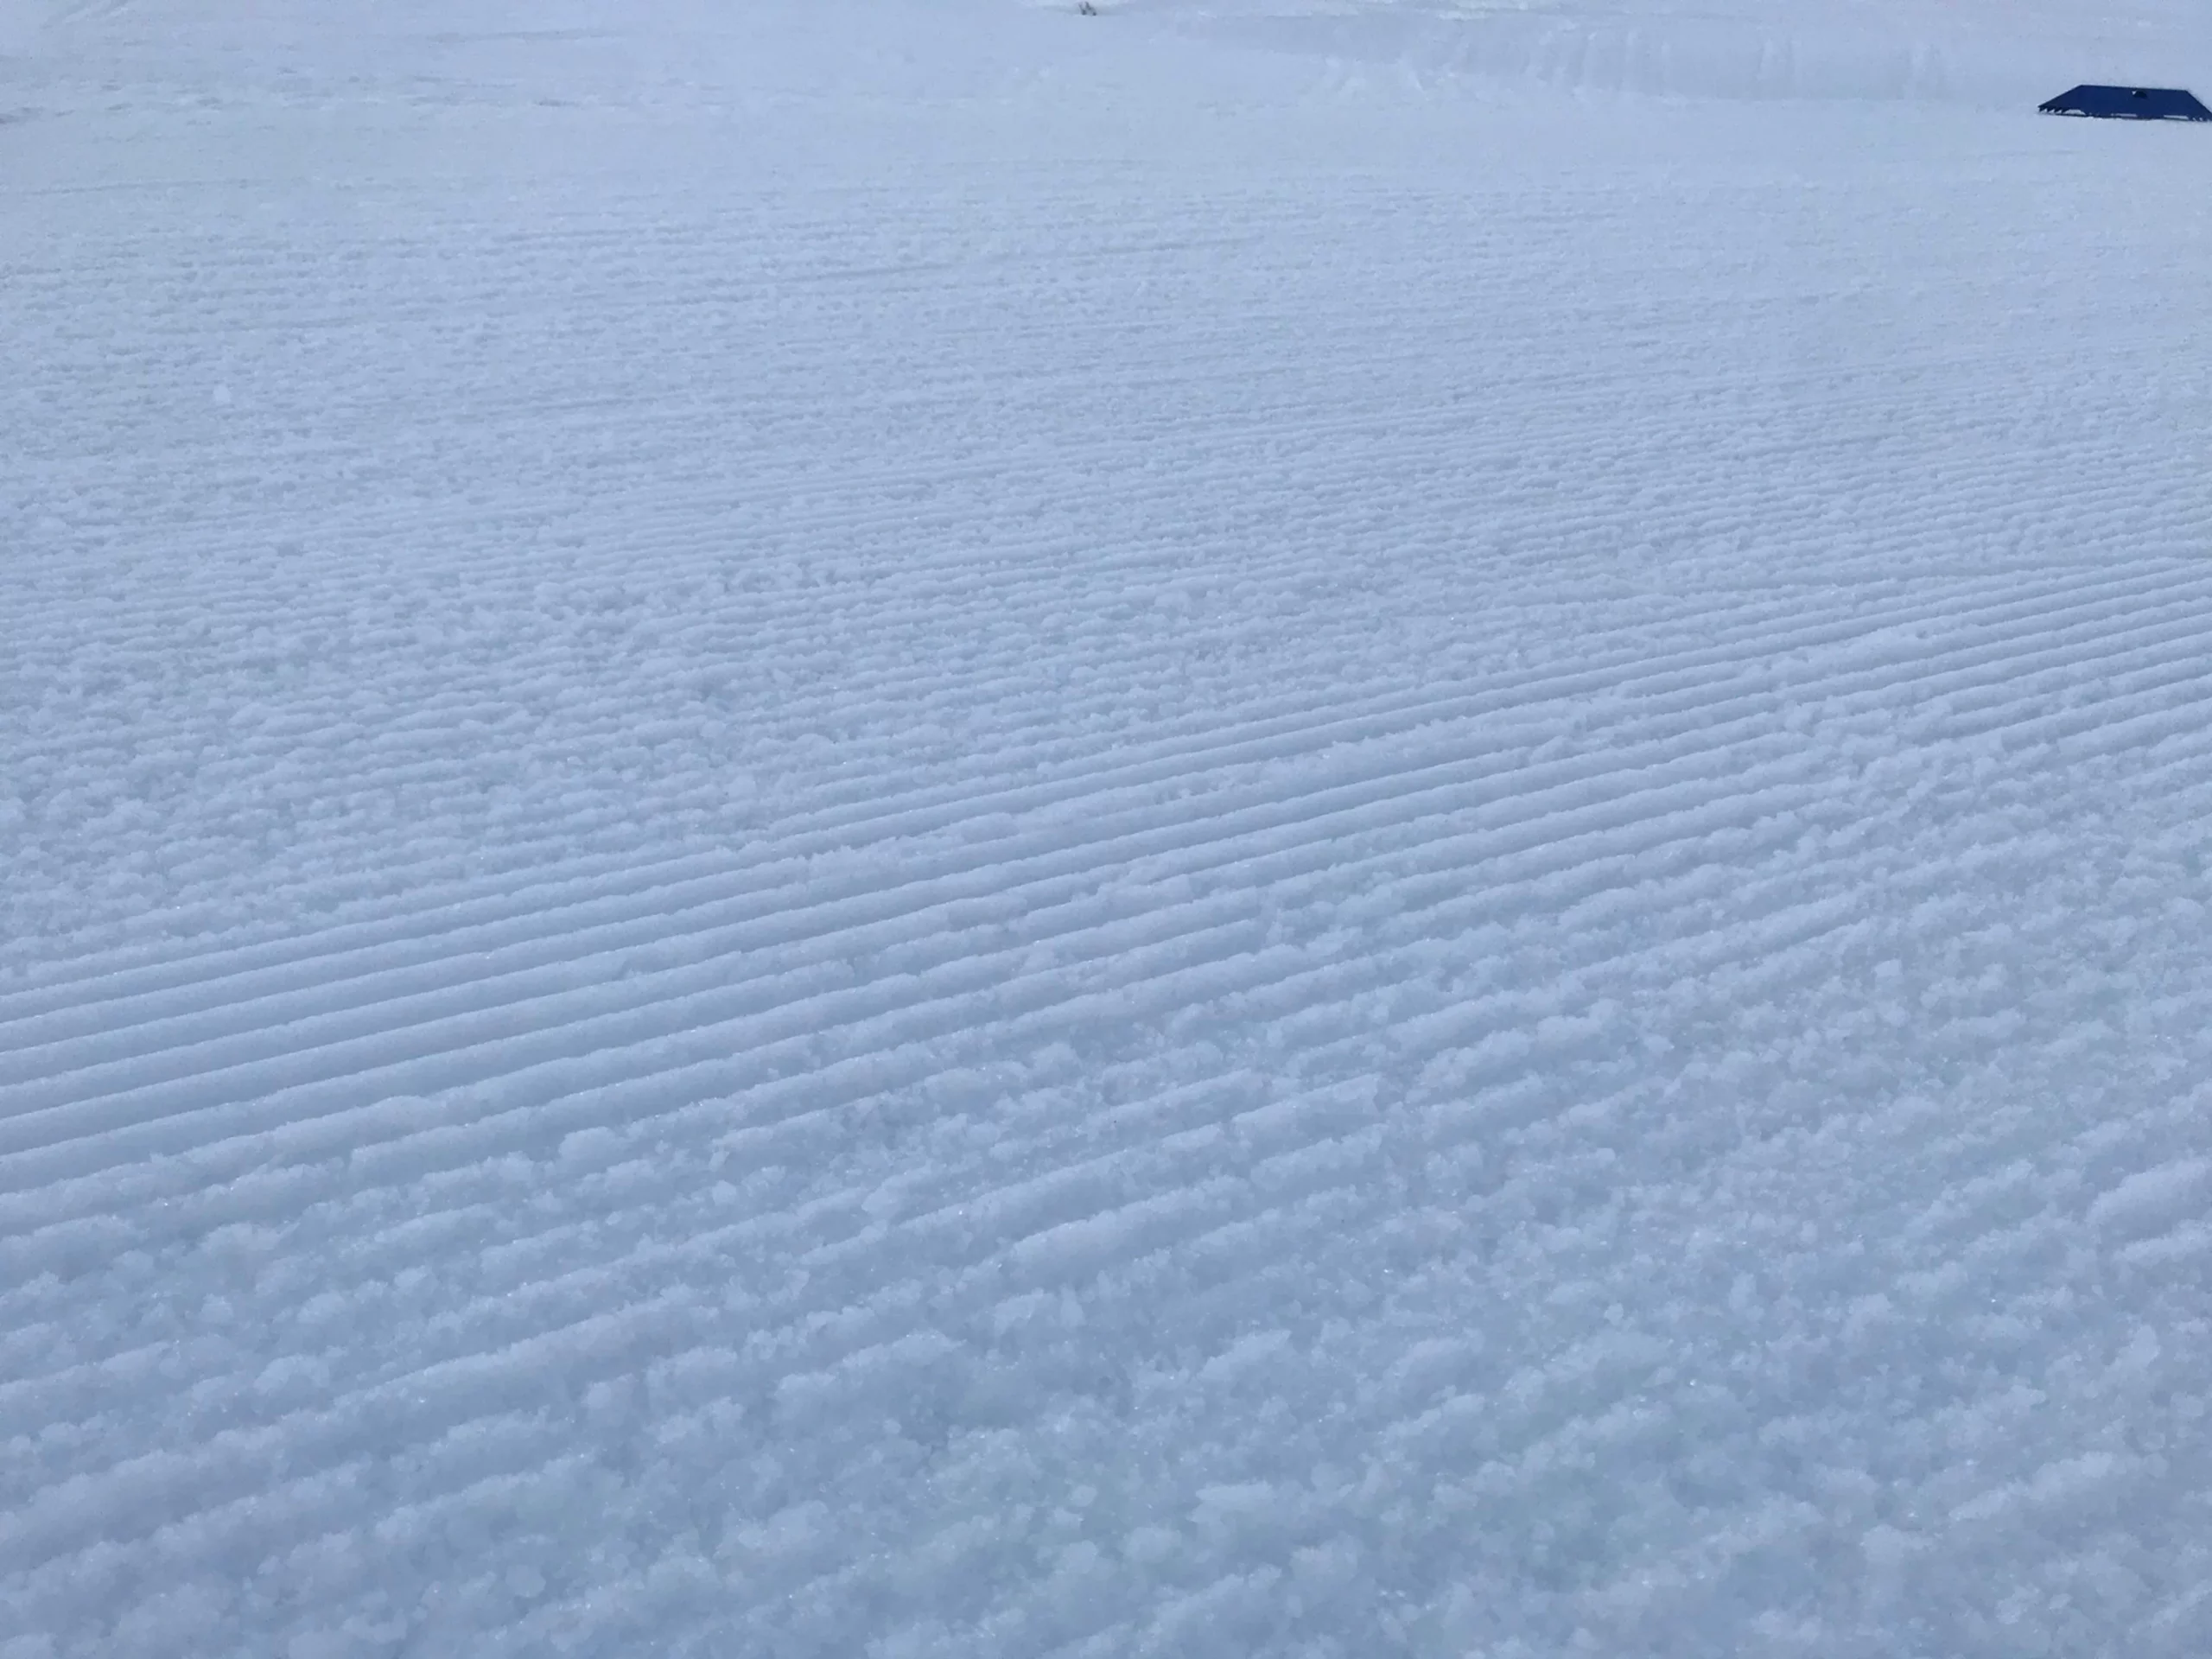 Corduroy for Groomed Trails